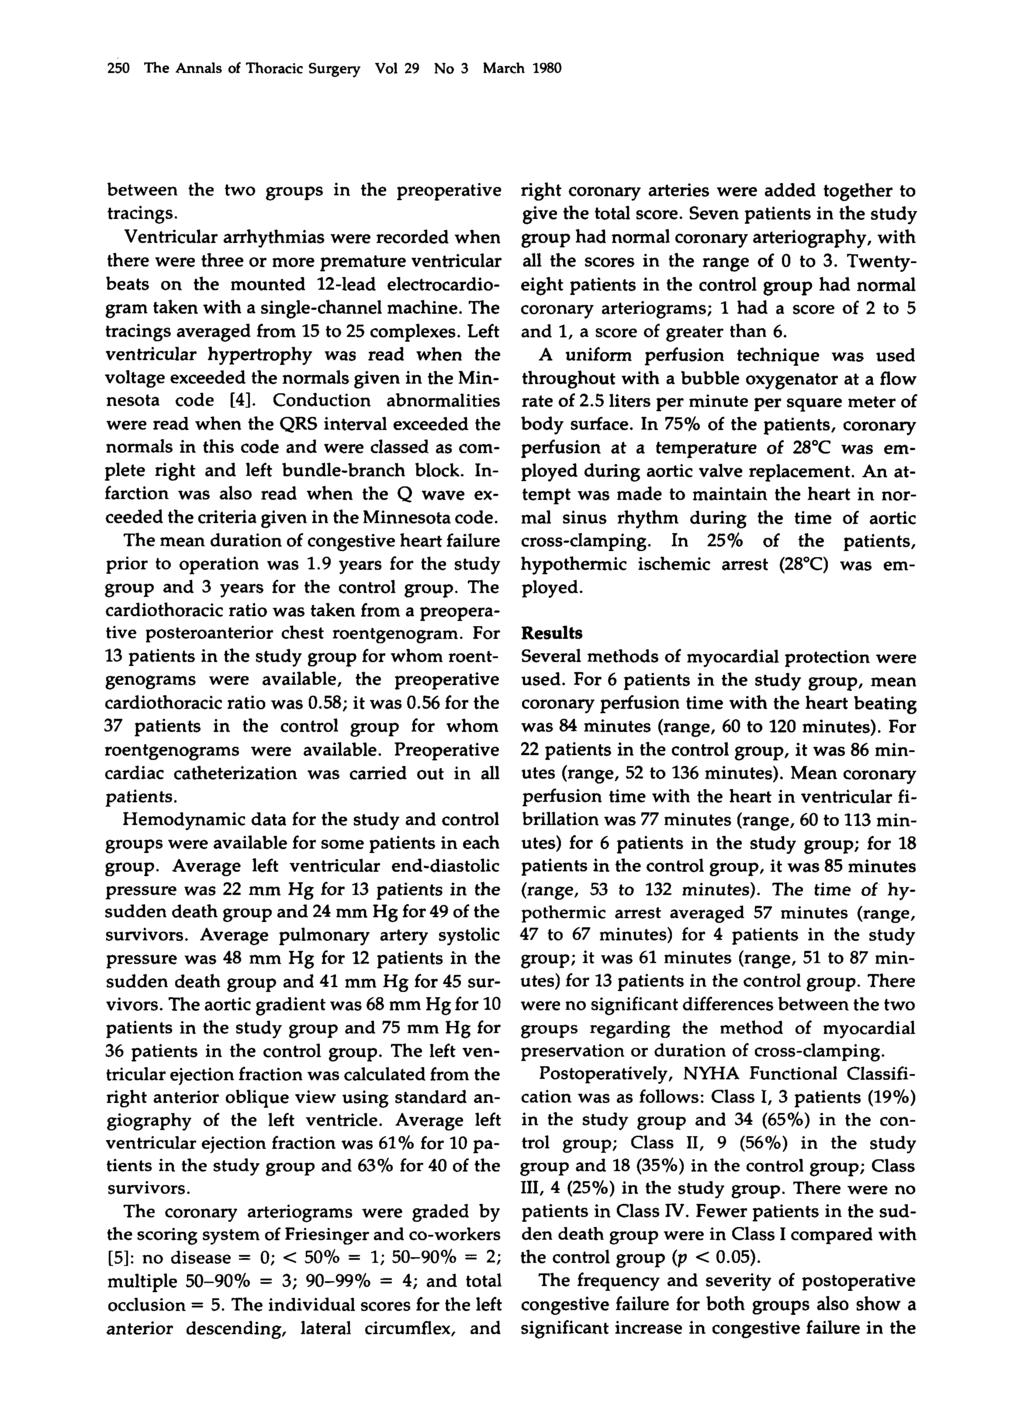 250 The Annals of Thoracic Surgery Vol 29 No 3 March 1980 between the two groups in the preoperative tracings.